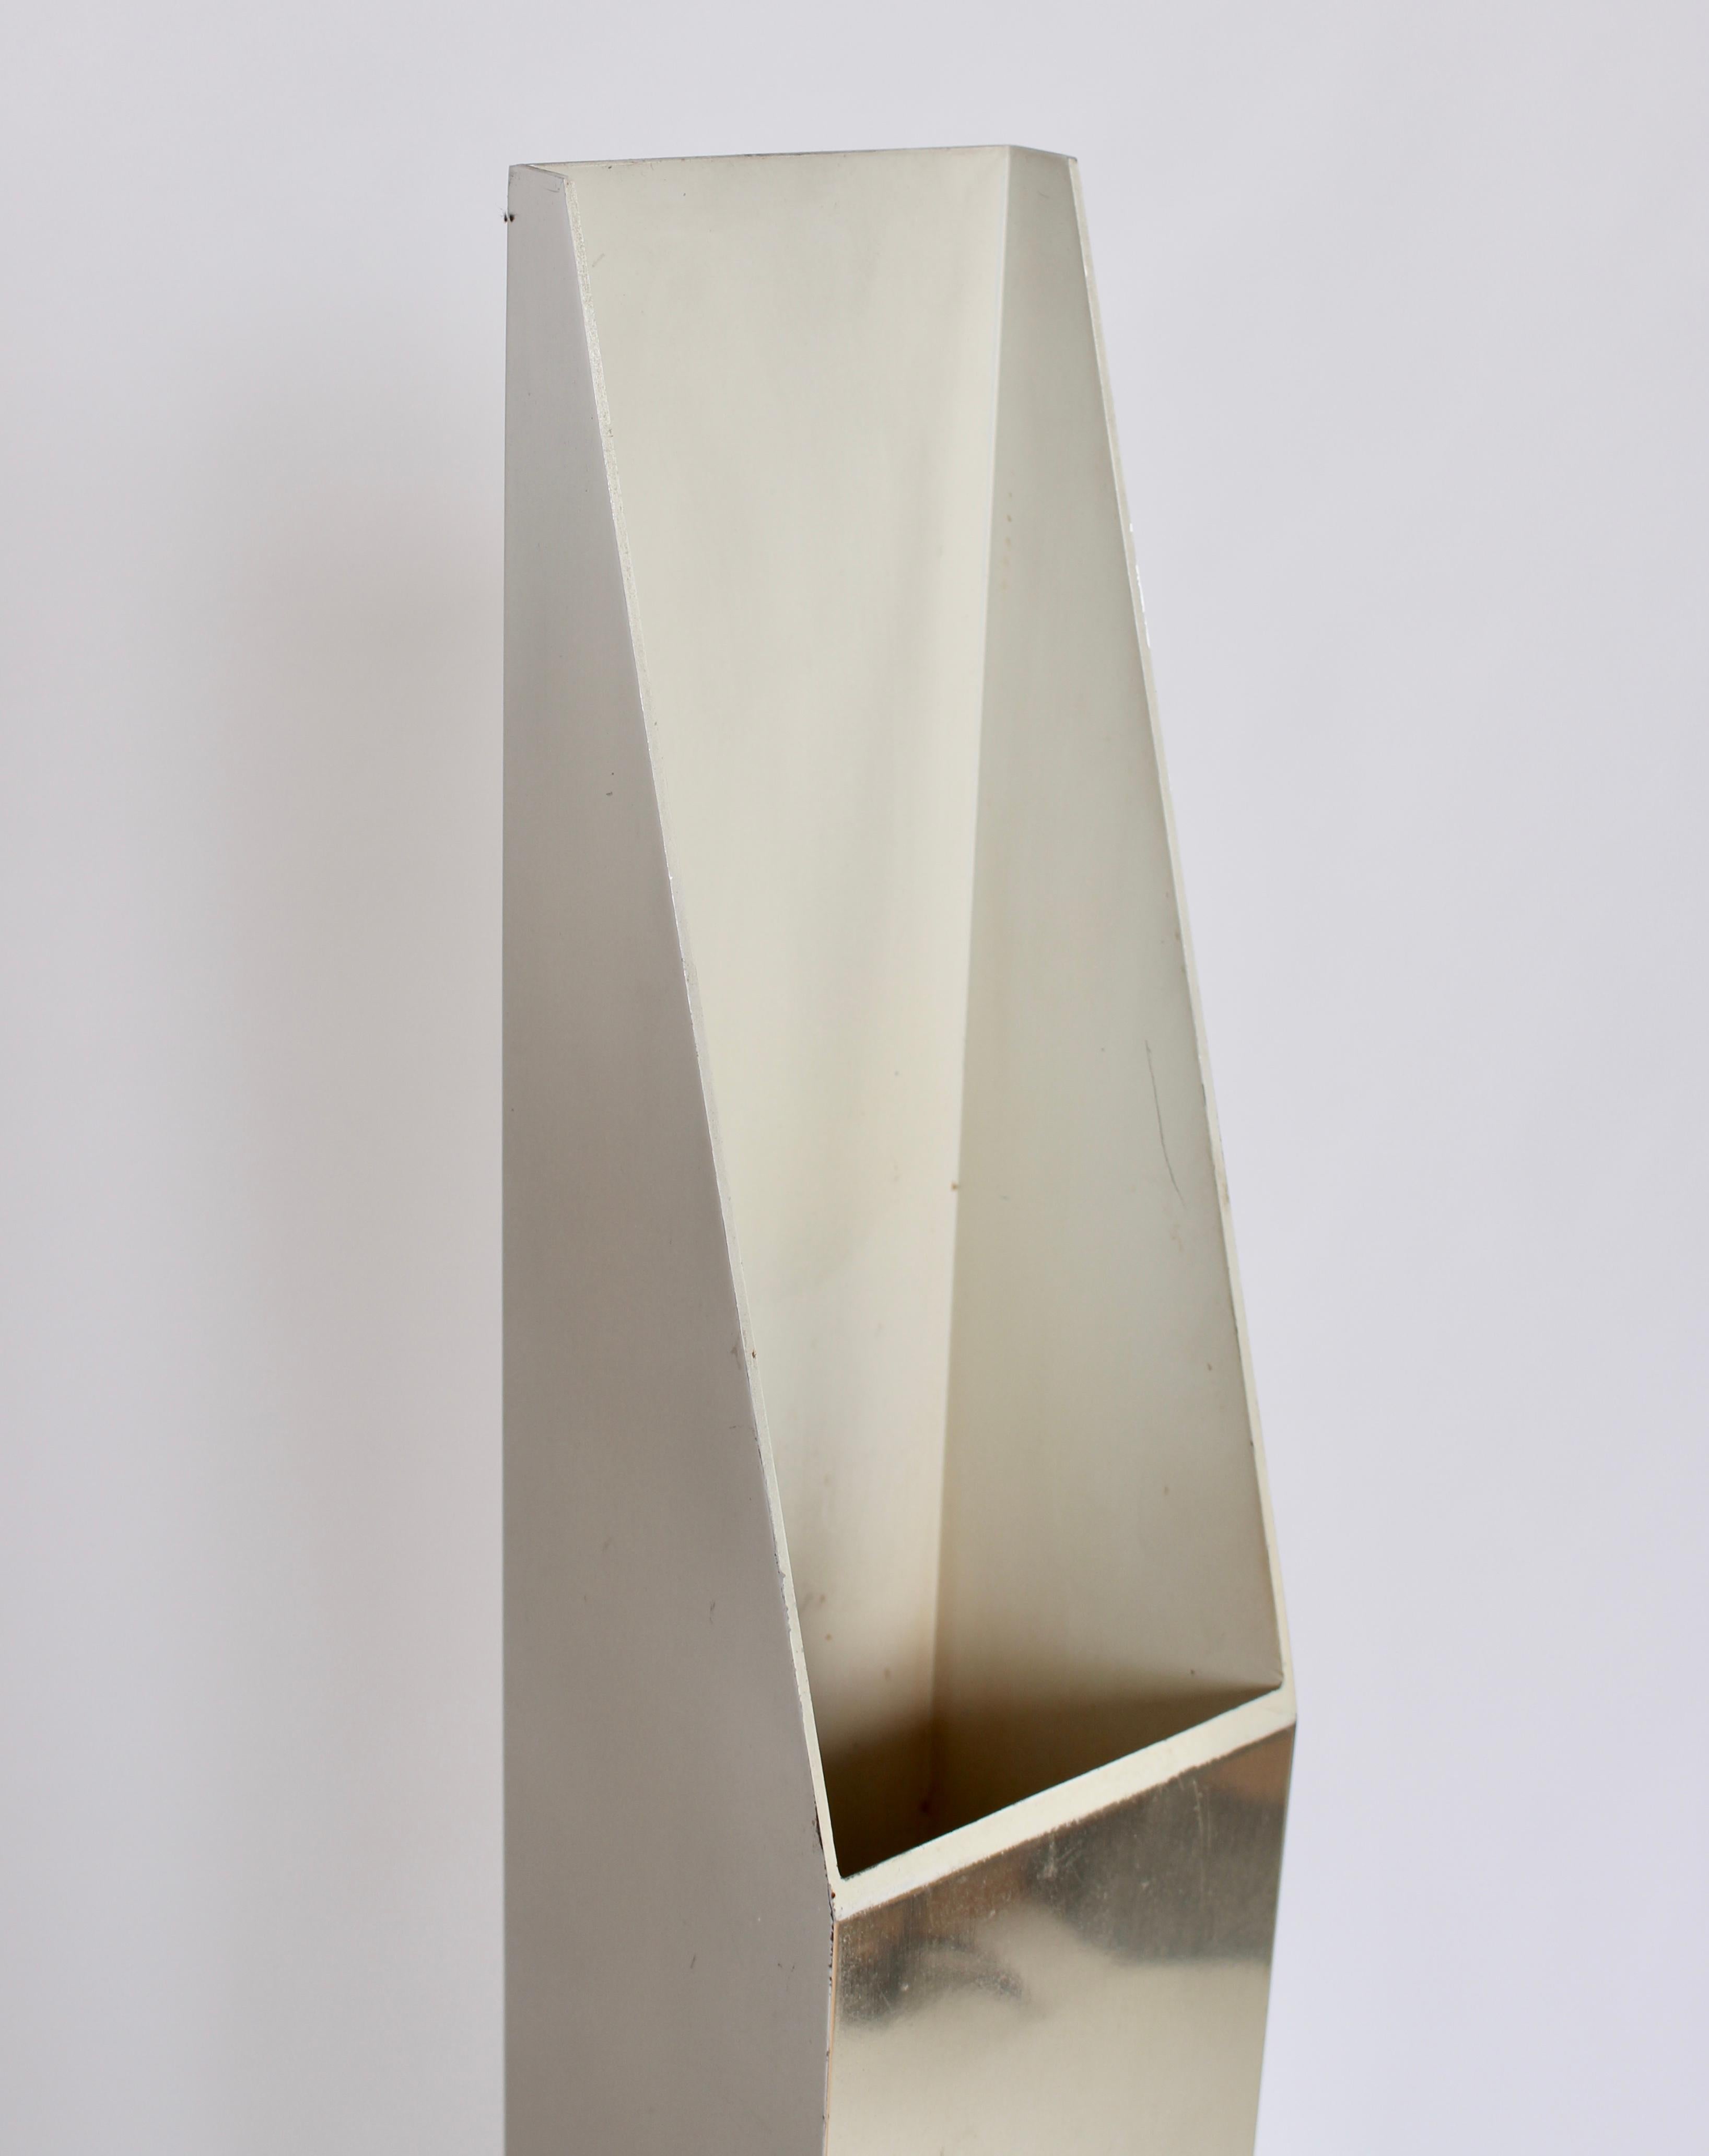 Enameled Neal Small for Koch & Lowy Aluminum and Steel Skyscraper Floor Lamp, 1970s For Sale